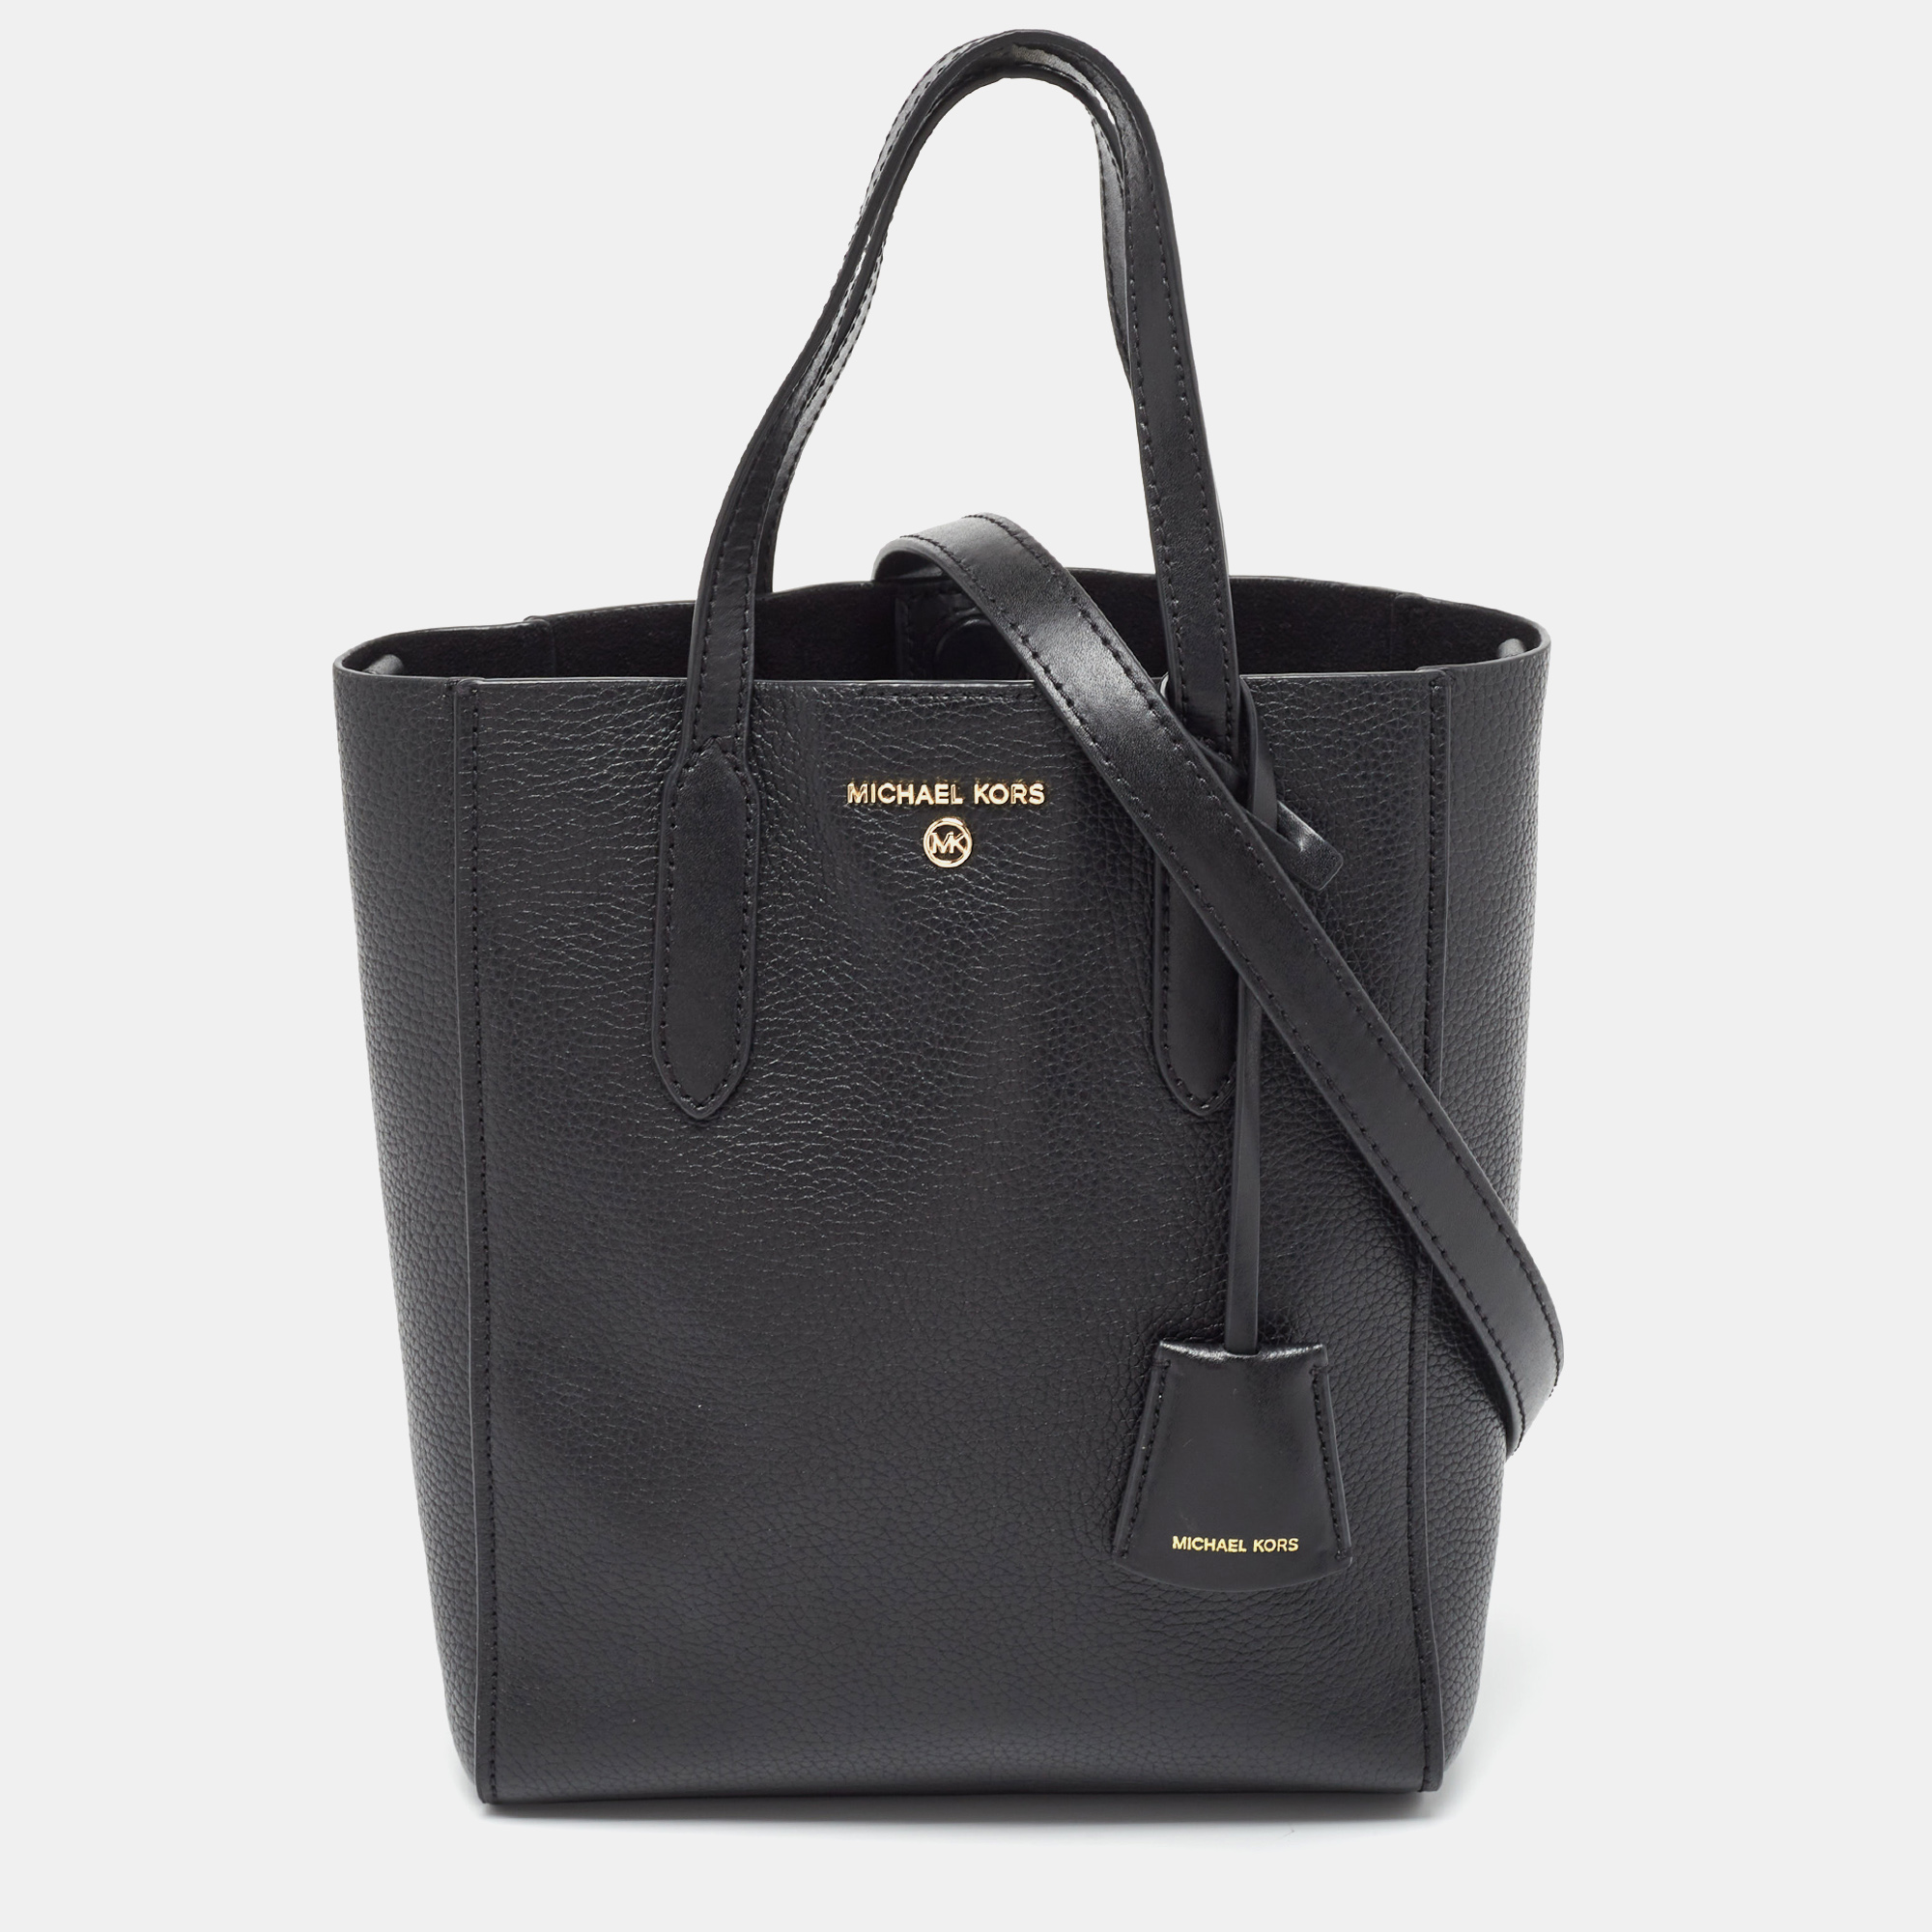 Be it your daily commute to work shopping sprees and vacations a tote bag will never fail you. This designer creation is made to last and assist you in your fashion filled days.